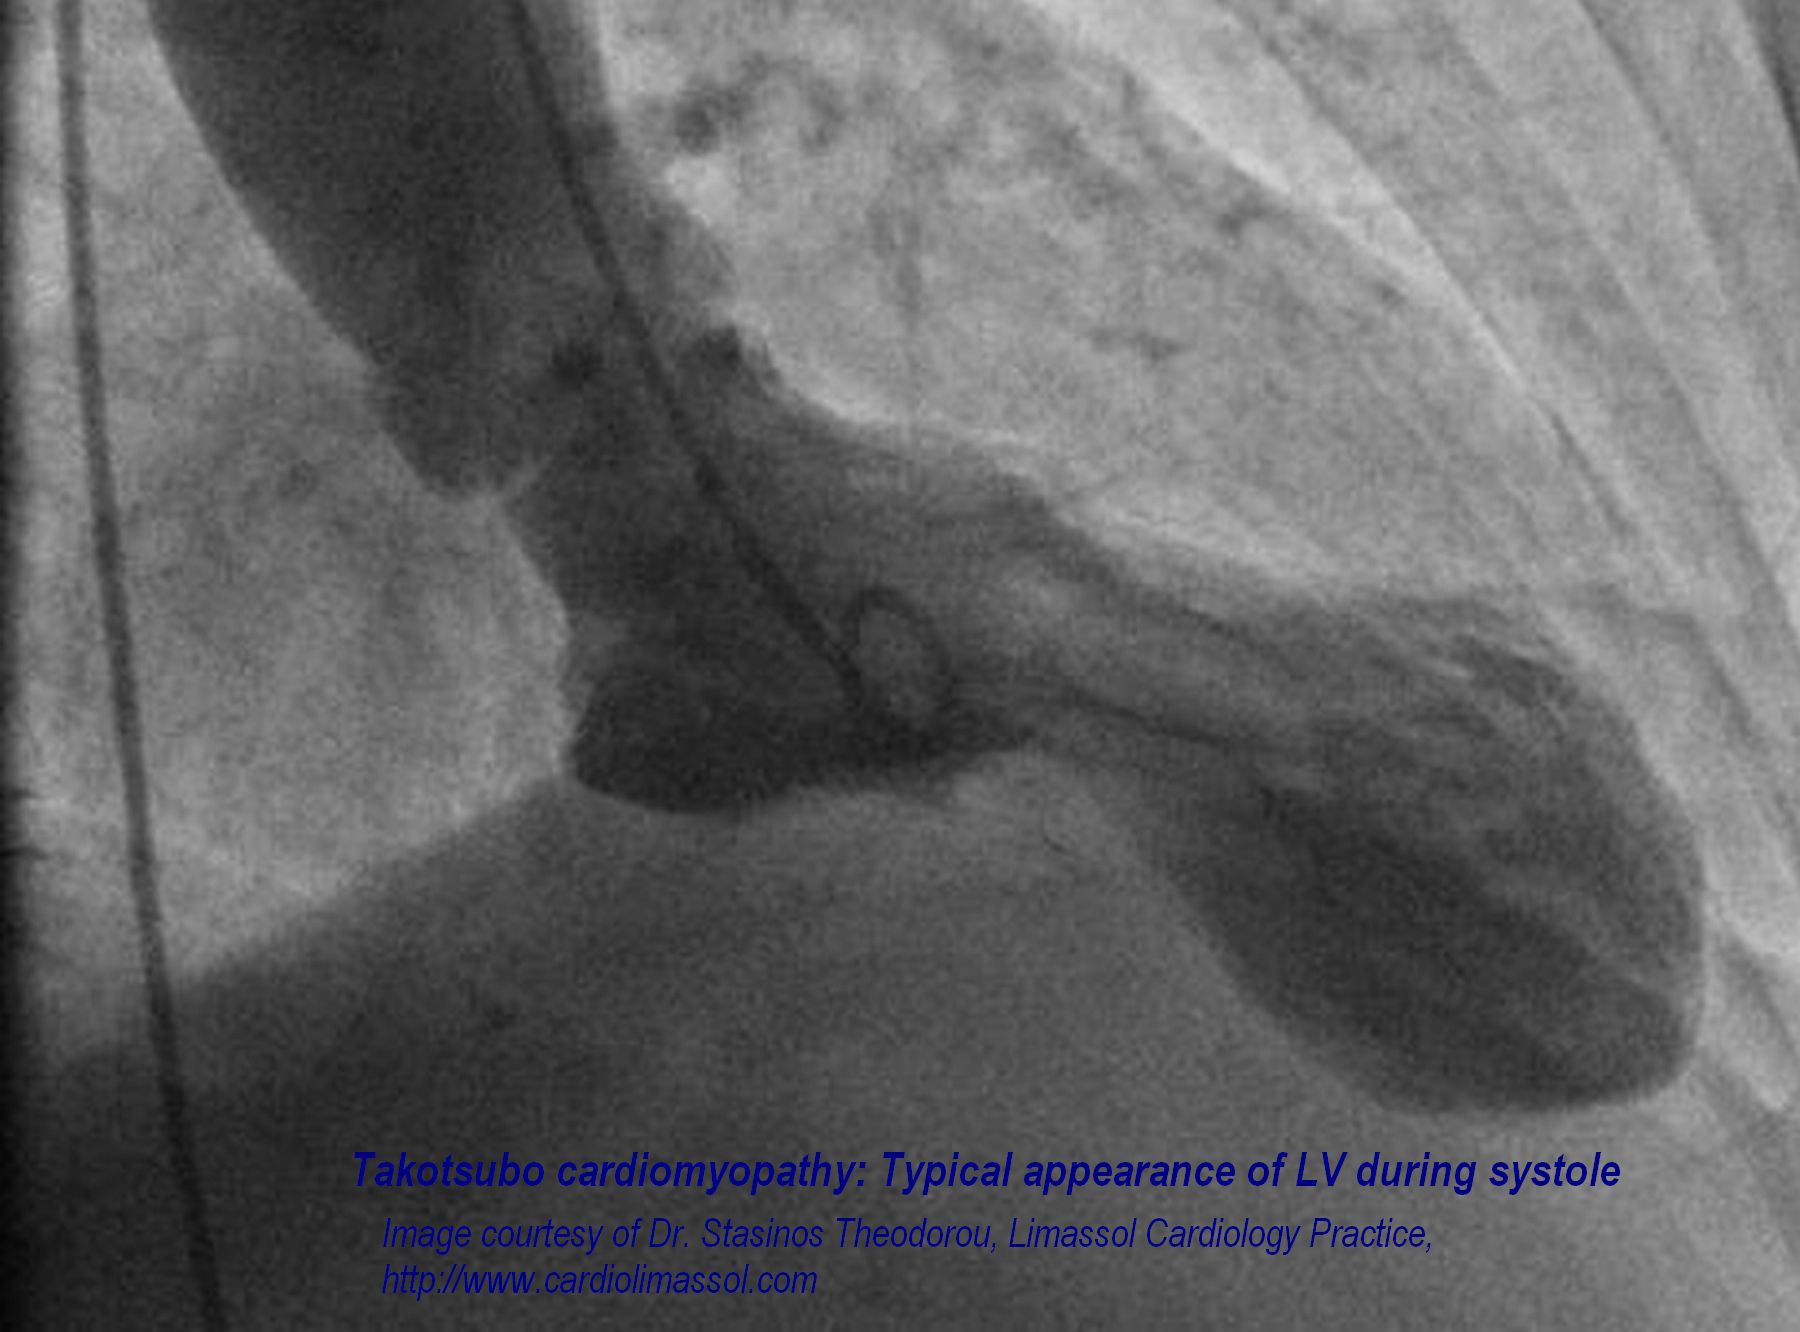 Familial apical dilated cardiomyopathy in a young man: a novel phenotype of  Takatsubo syndrome or a new entity altogether?